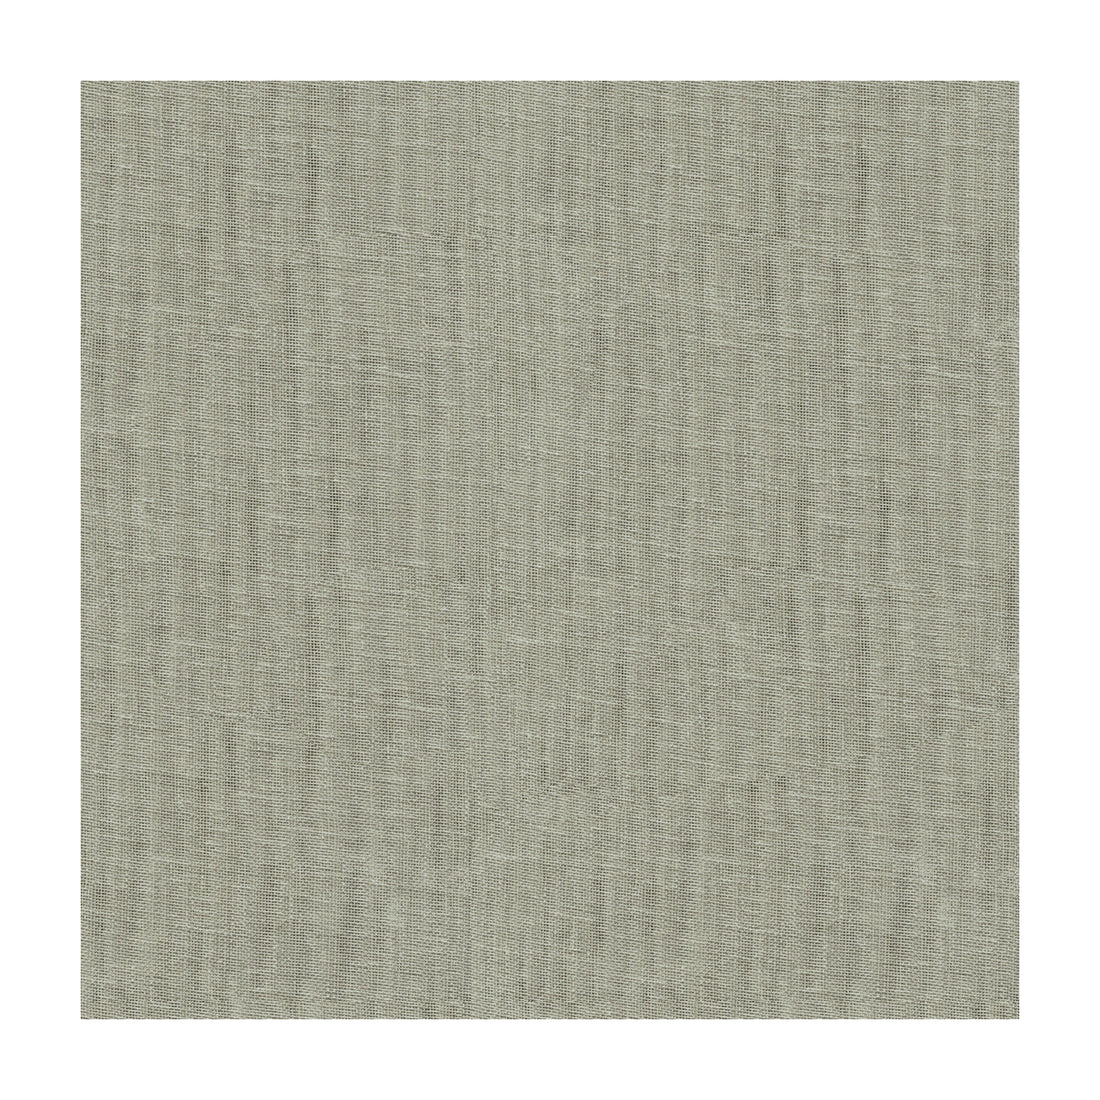 Kravet Contract fabric in 4155-11 color - pattern 4155.11.0 - by Kravet Contract